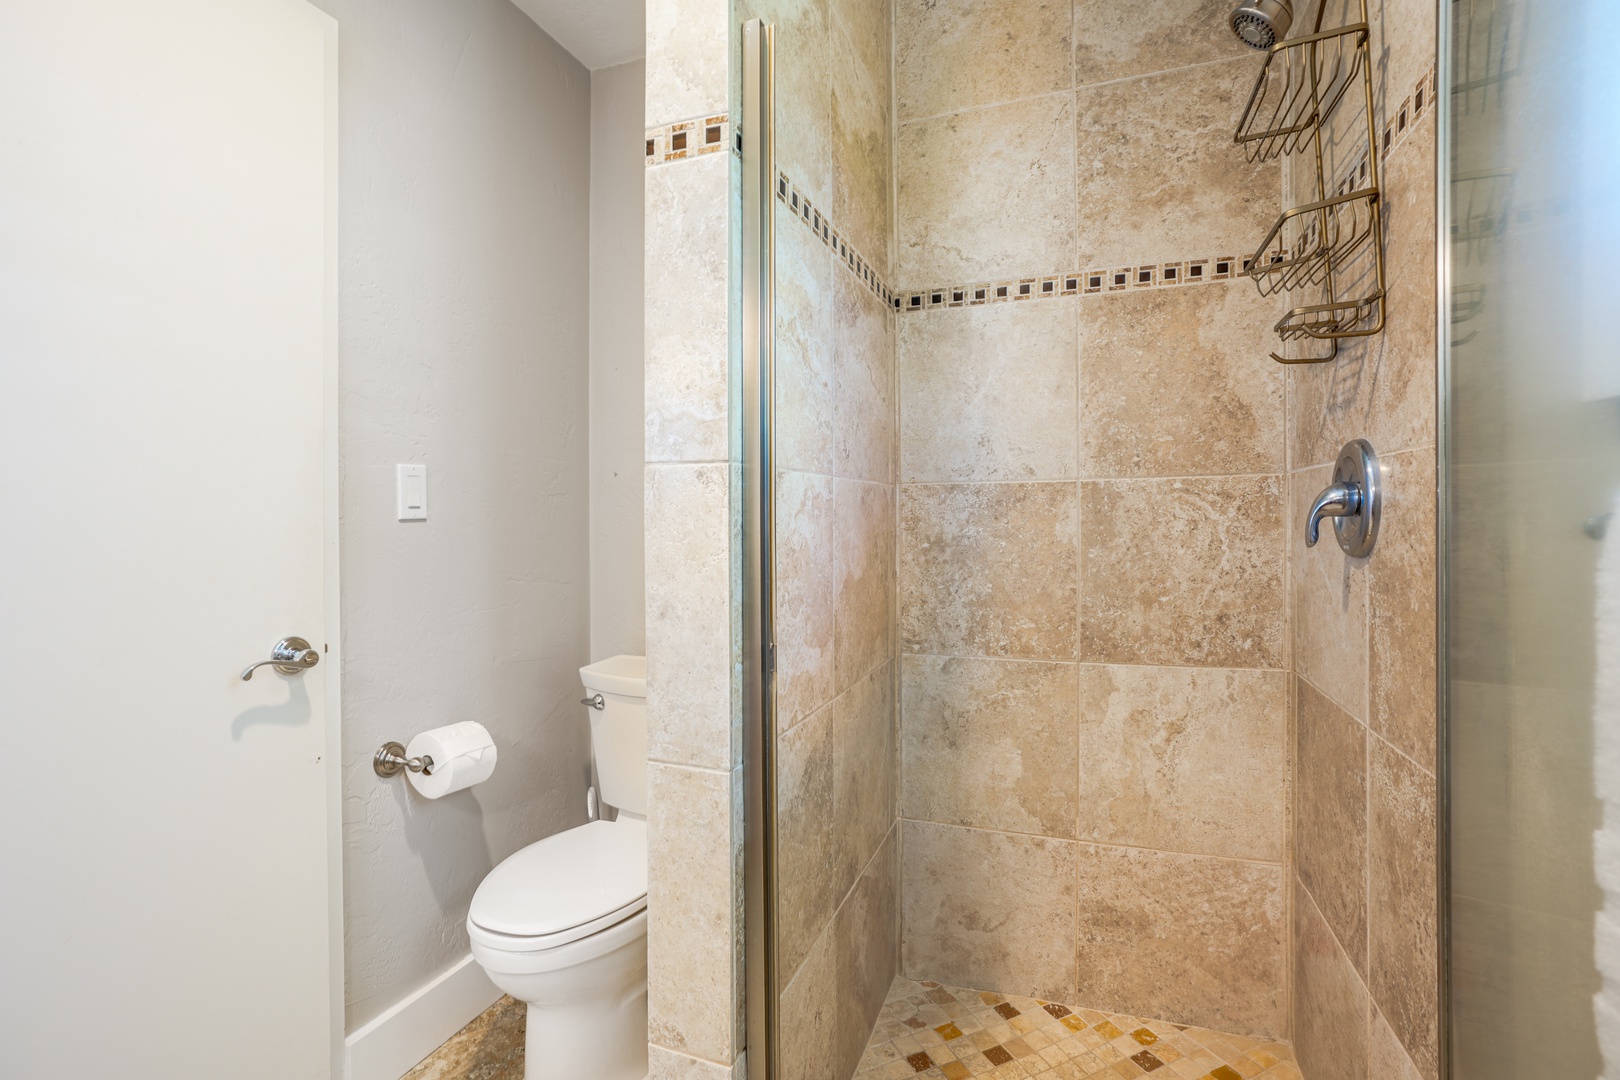 Princeville Vacation Rentals, Alii Kai 7201 - With a walk in semi-enclosed shower.